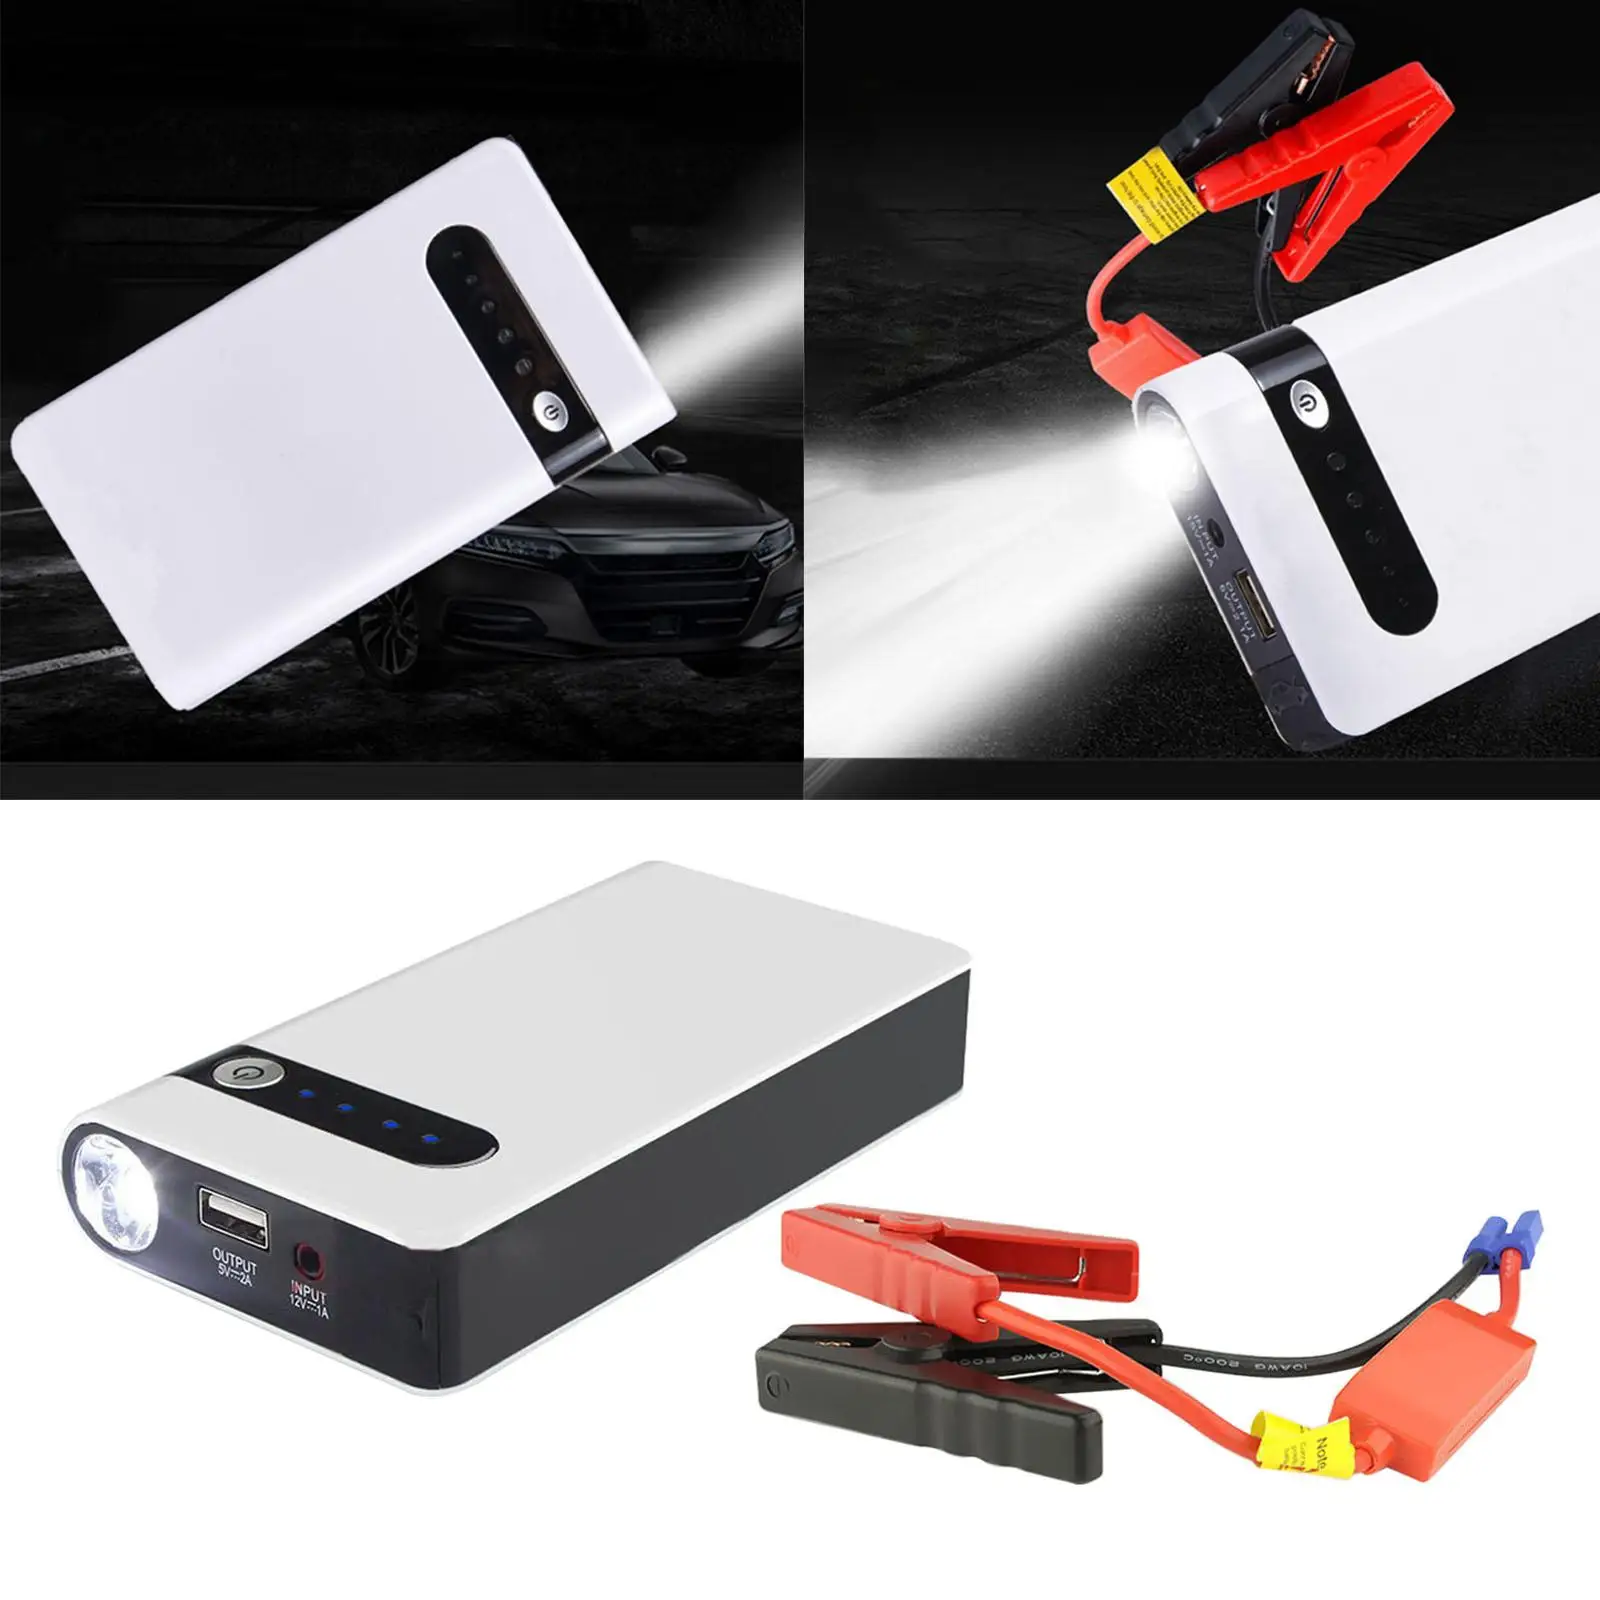 Starter with Flashlight 8000mAh 12V Emergency Start Power Auto Battery Booster Power Bank Charger for Tablet